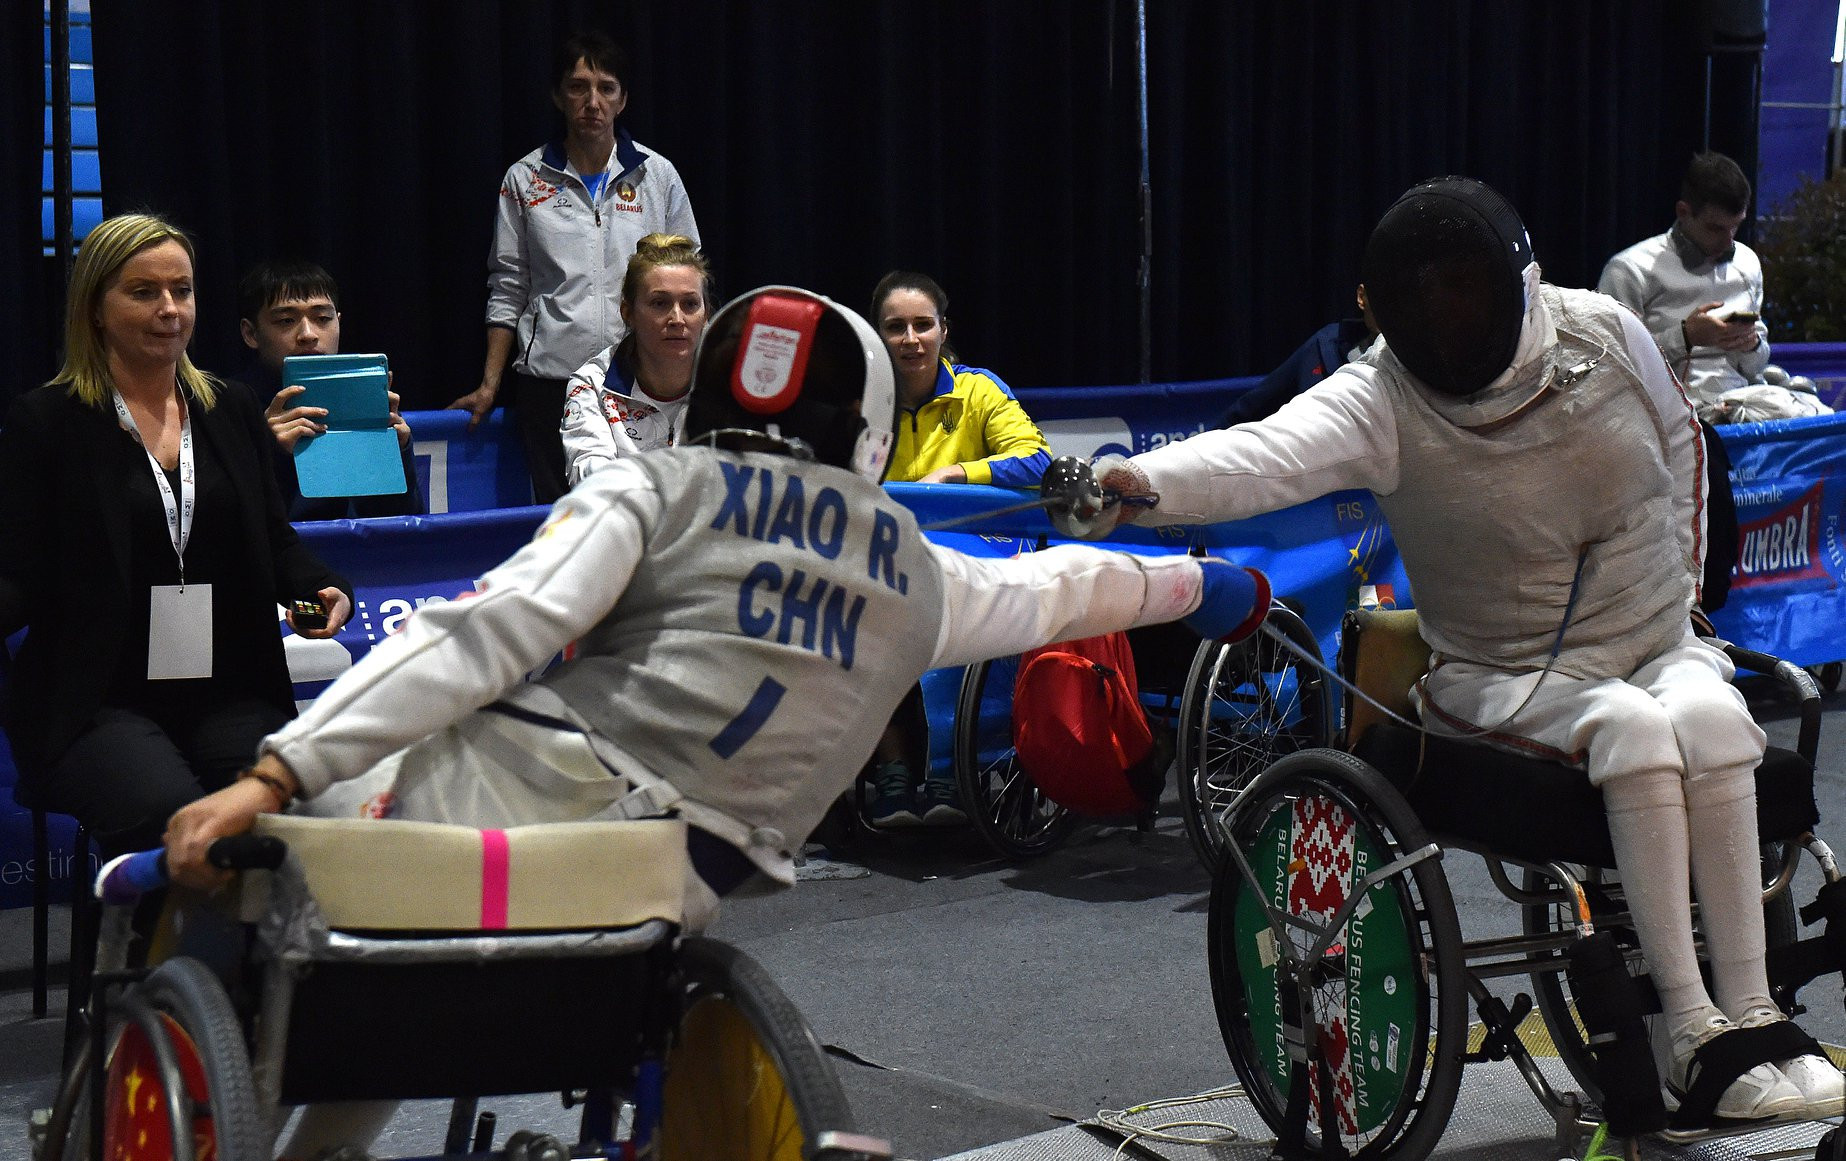 China and Russia take gold in team events at IWAS Wheelchair Fencing World Cup in Pisa